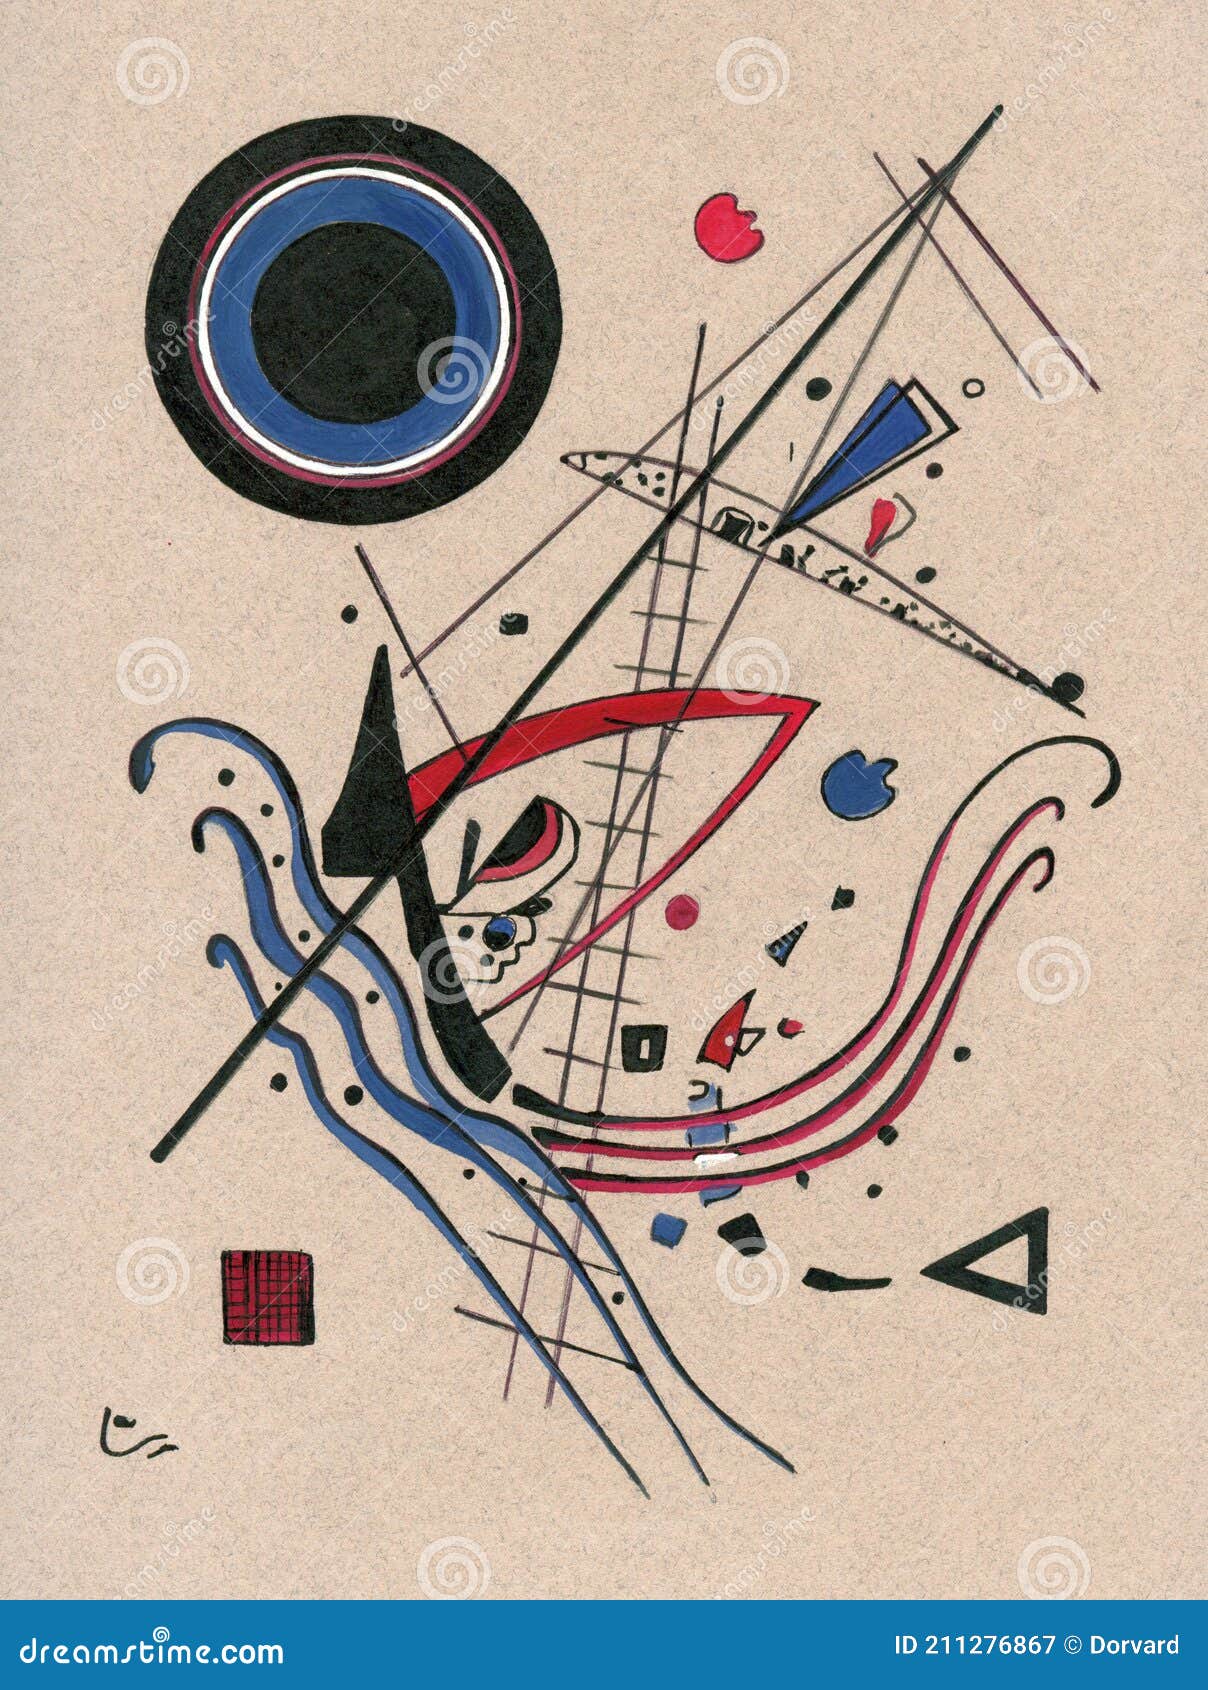 painting in manner of kandinsky on gray background